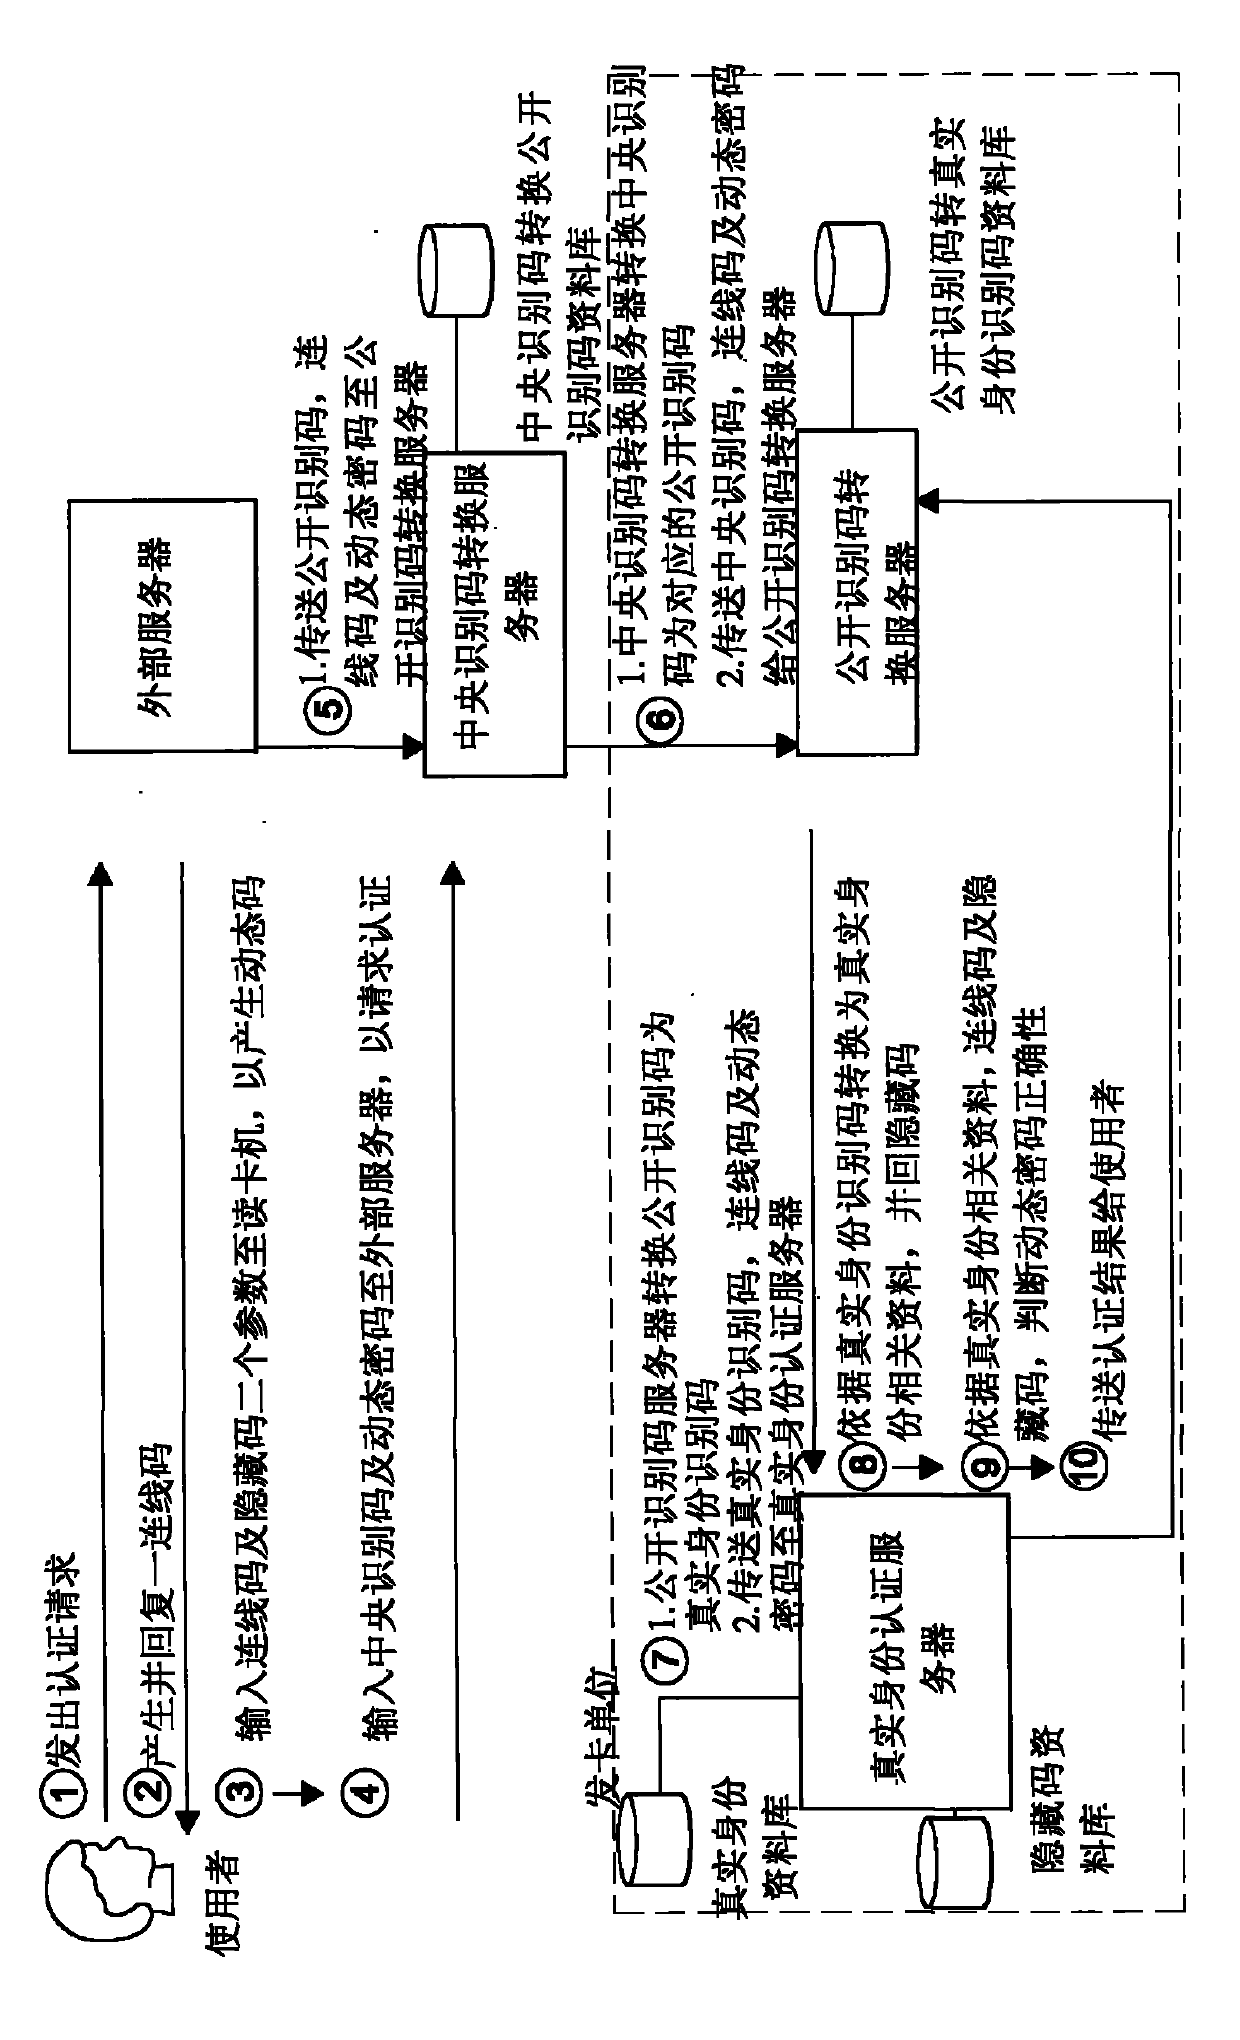 Multi-layer data mapping authentication system